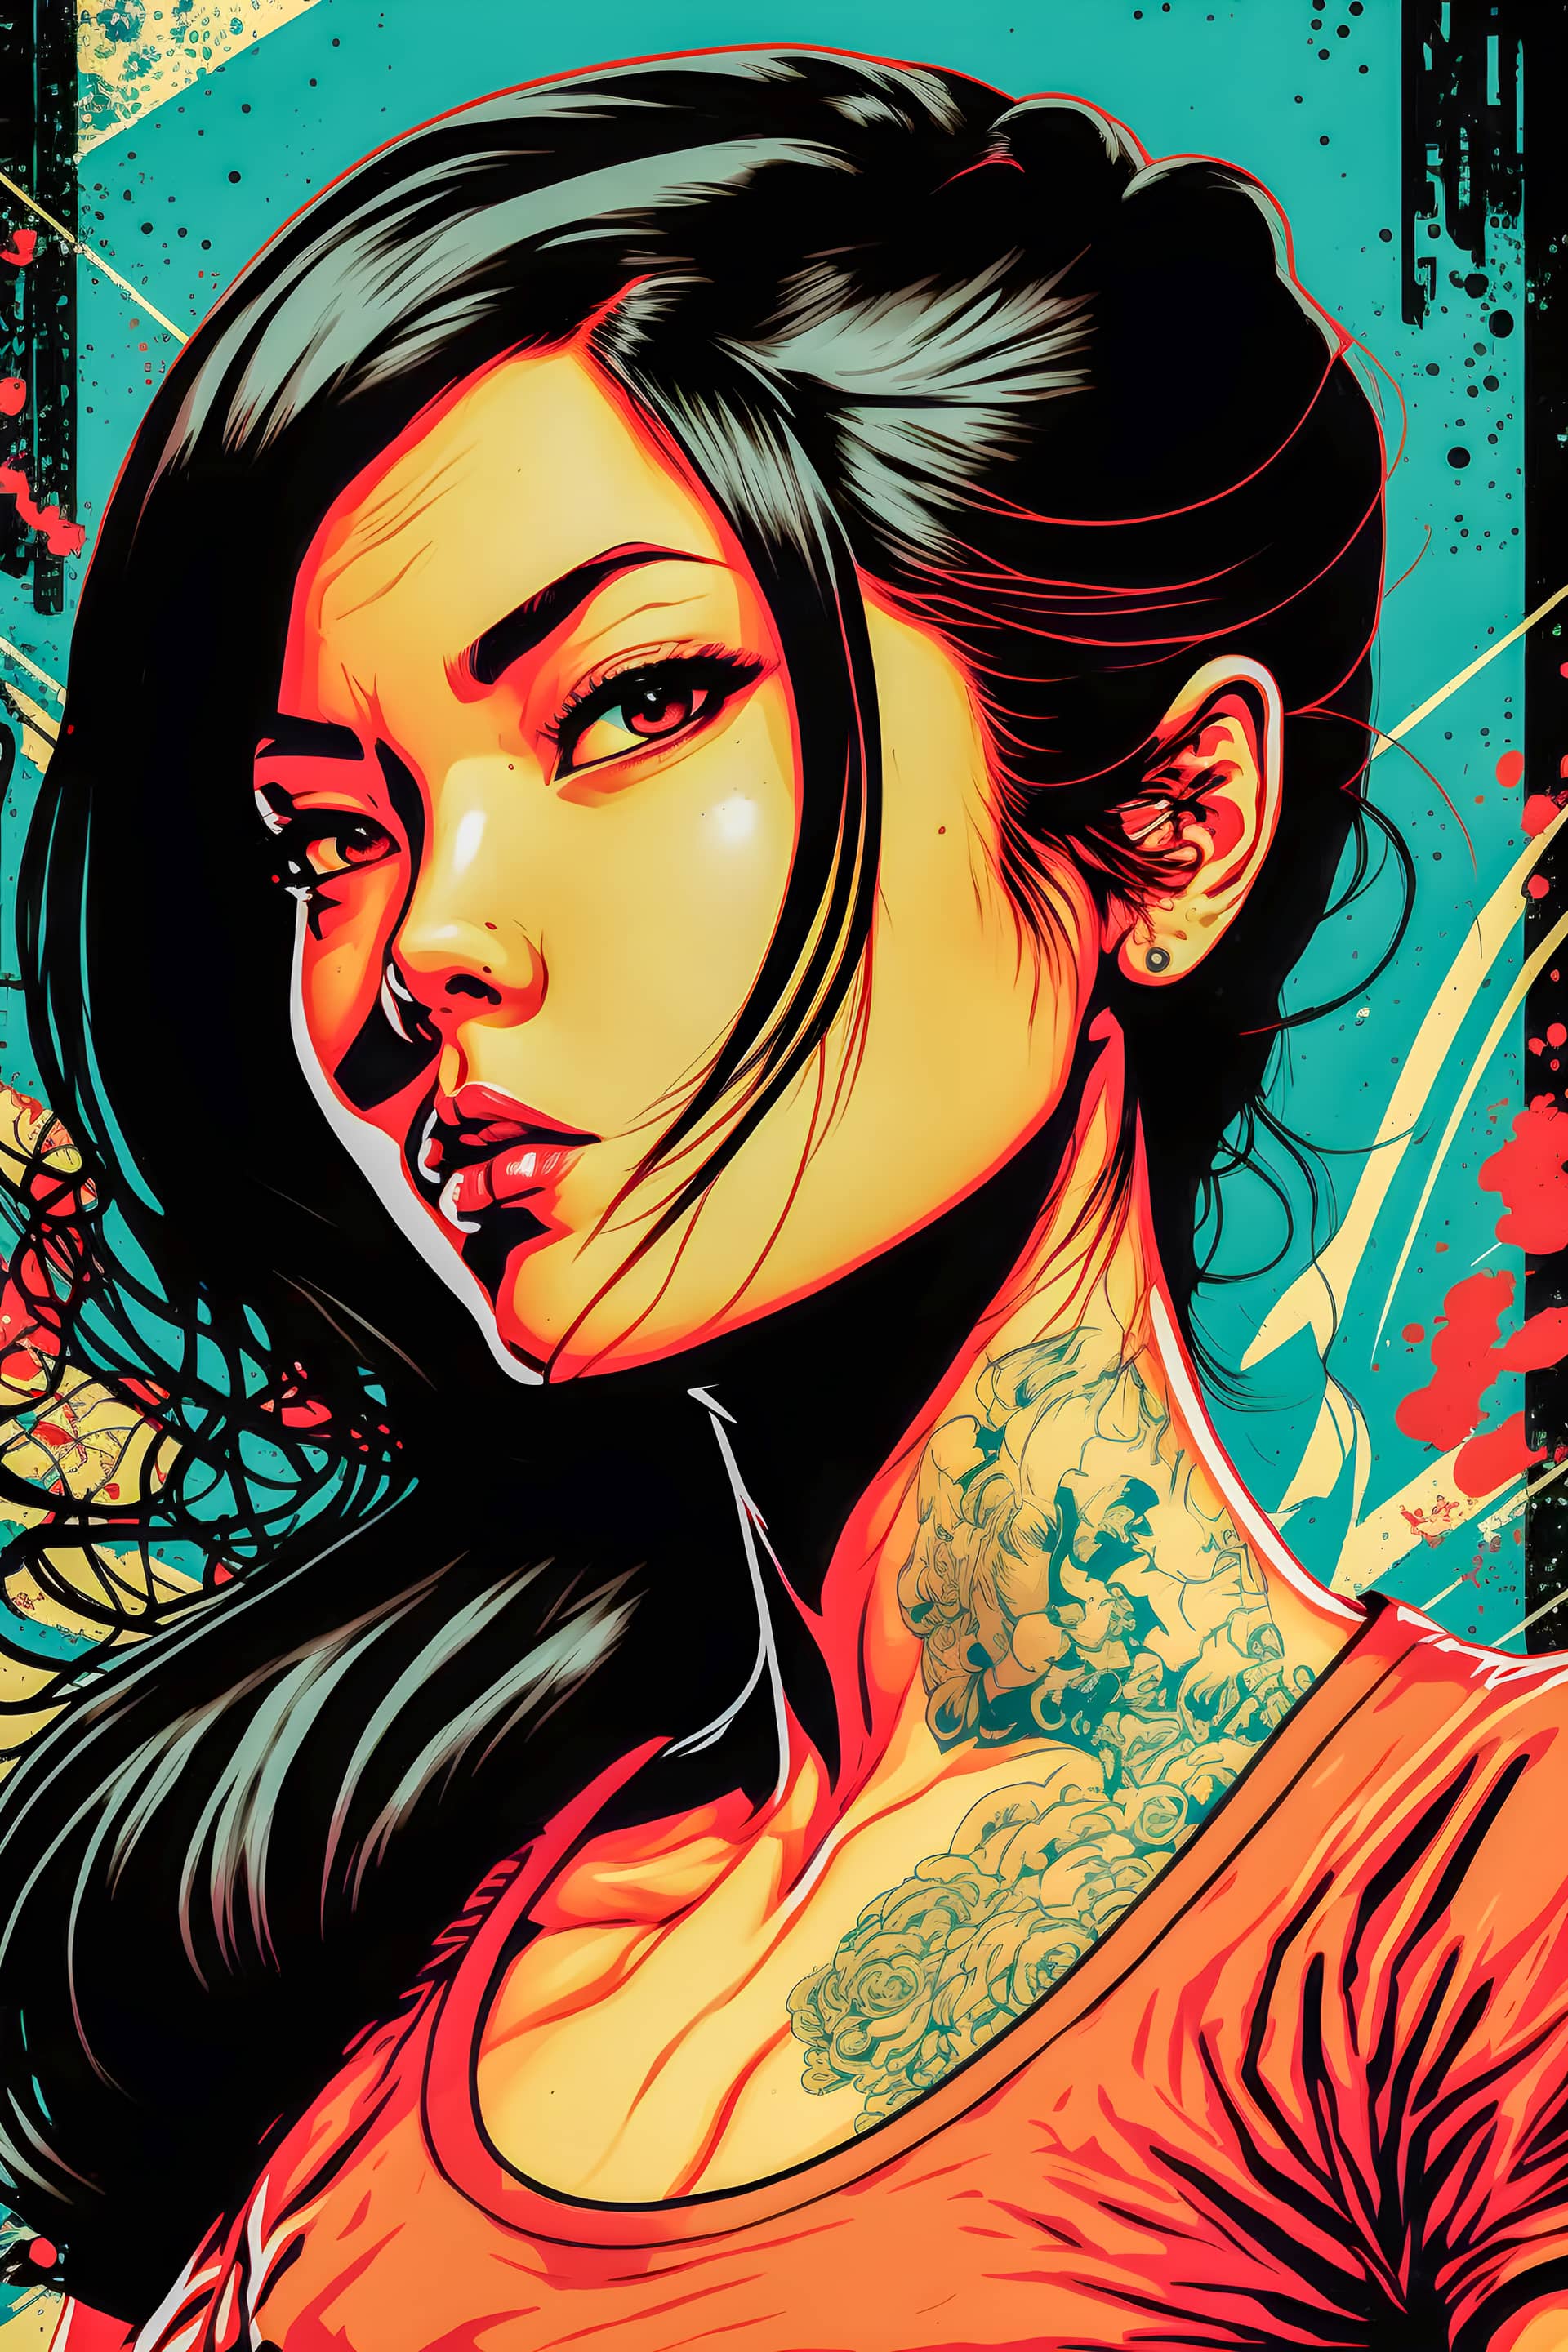 Asian american woman manga character design anime style excellent image